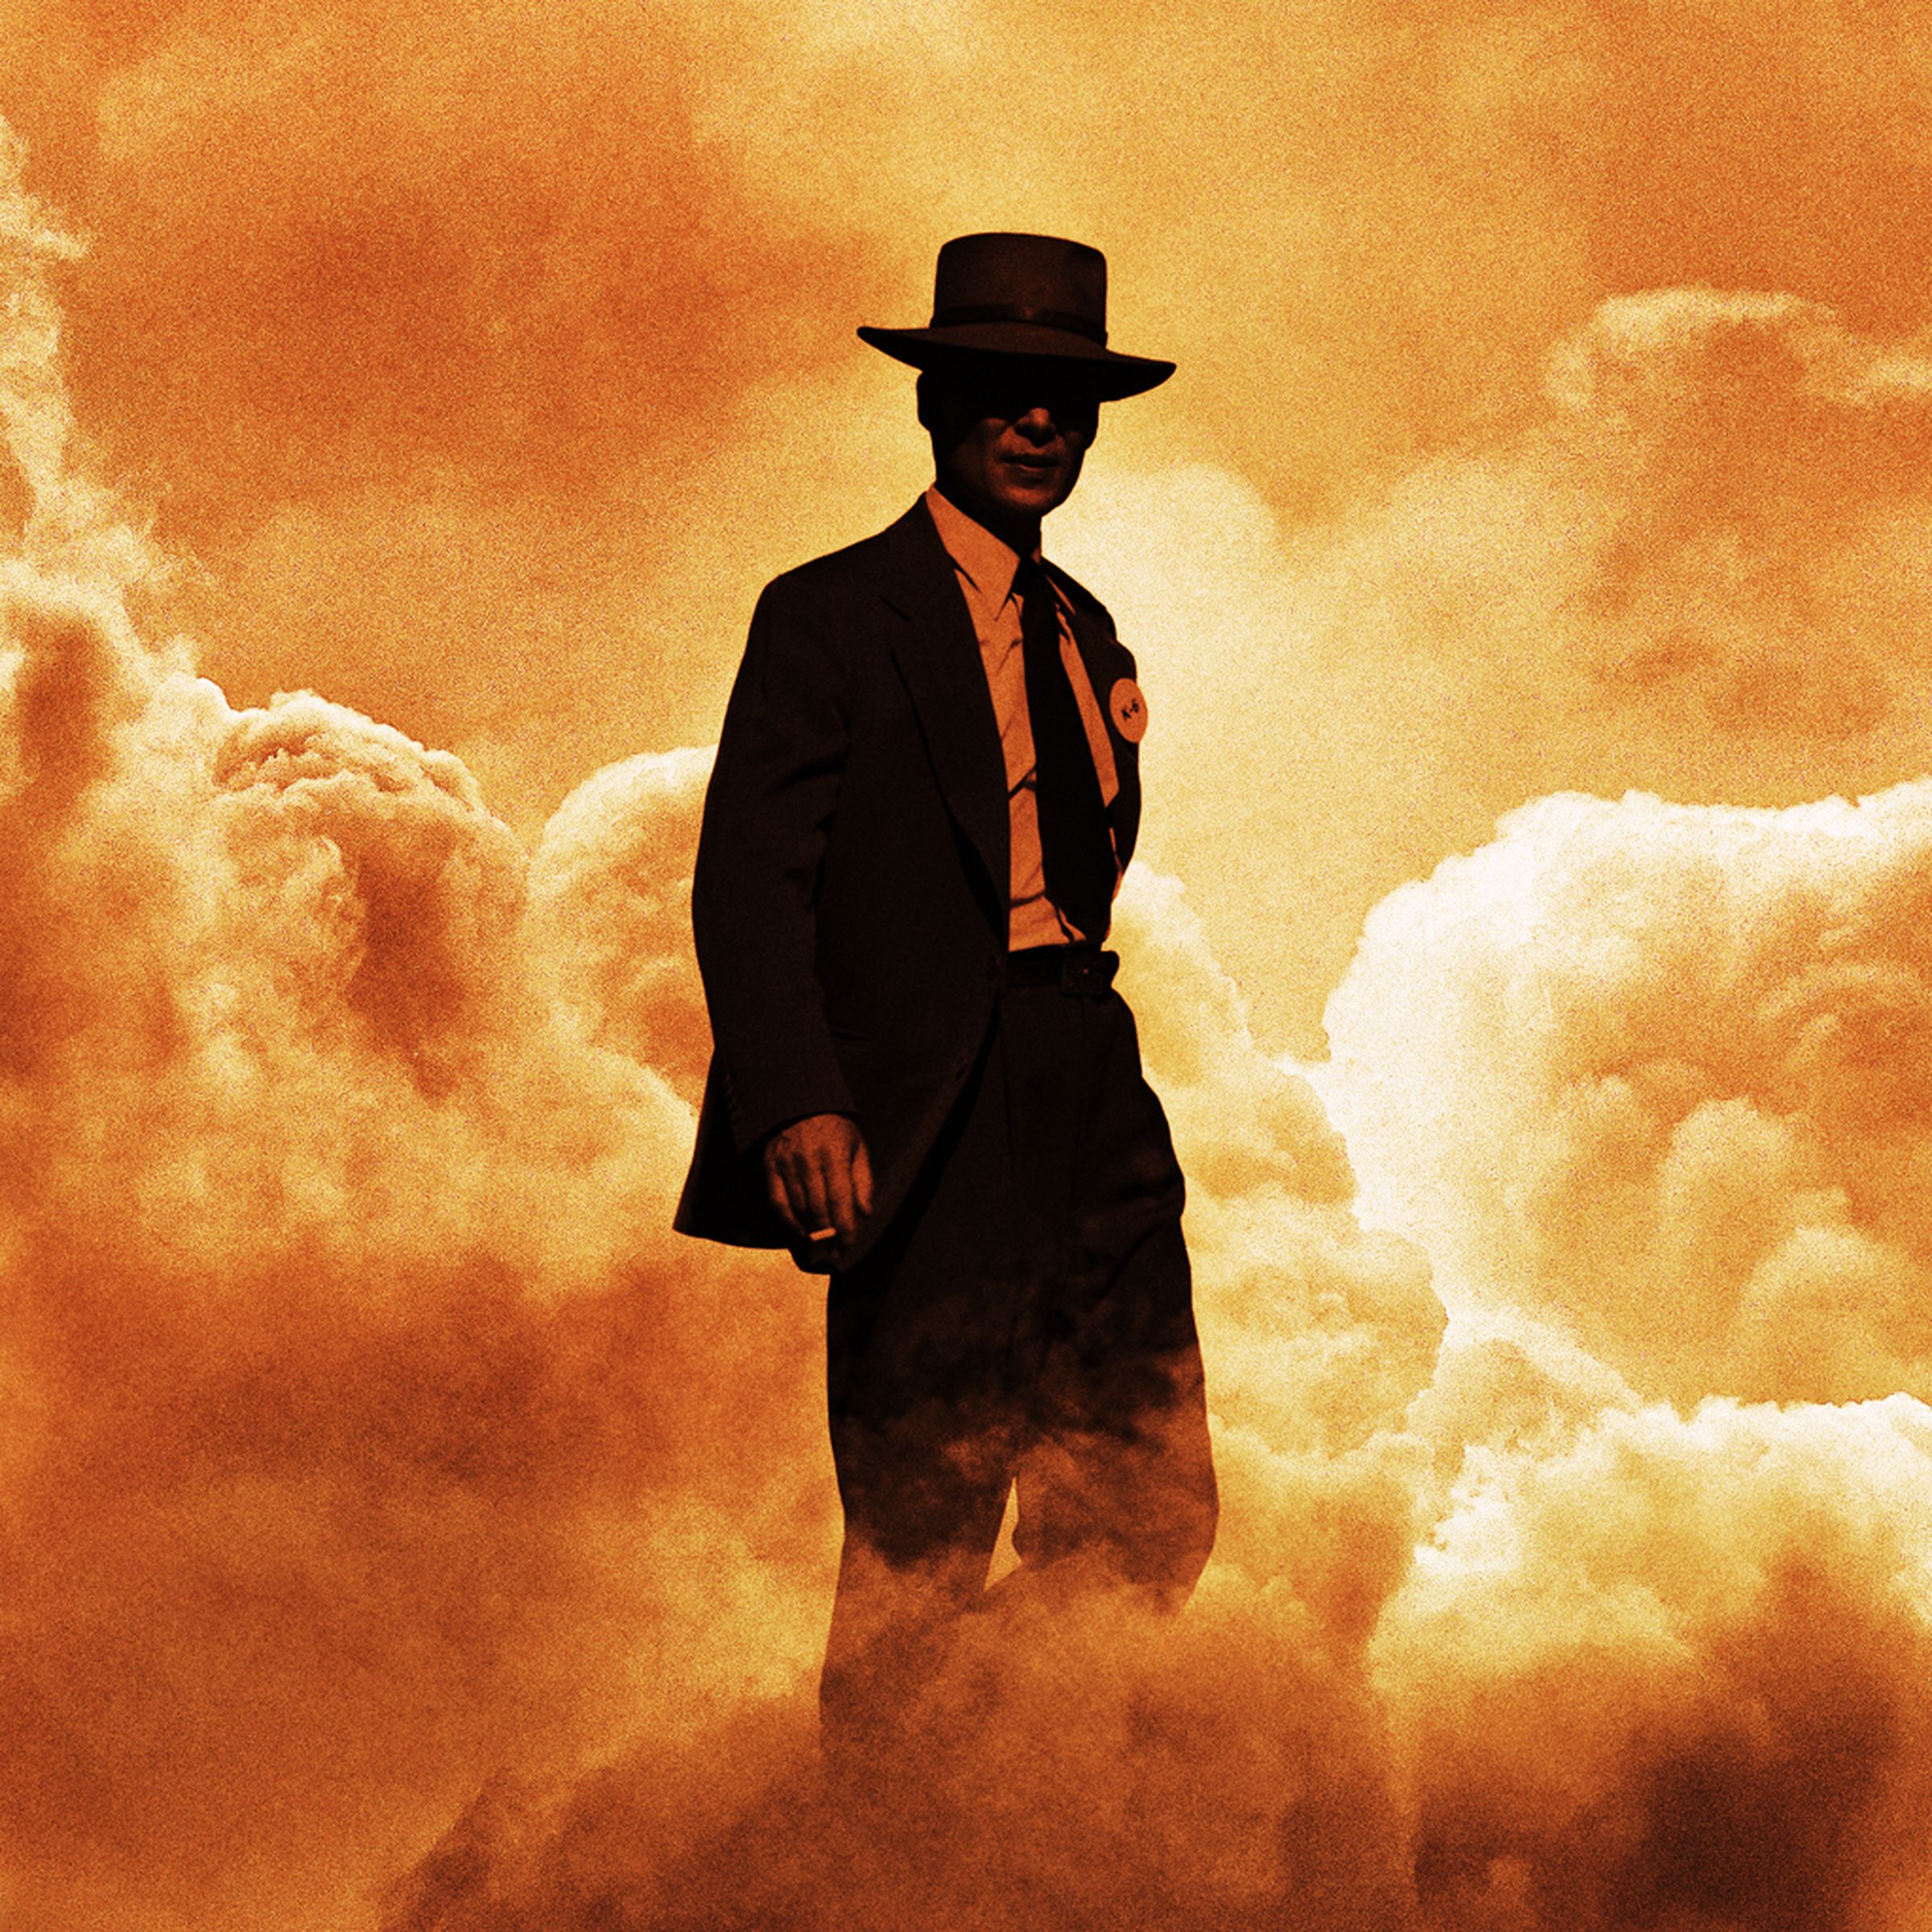 A man wearing a suit and a porkpie hat surrounded in what appears to either be clouds or flames.